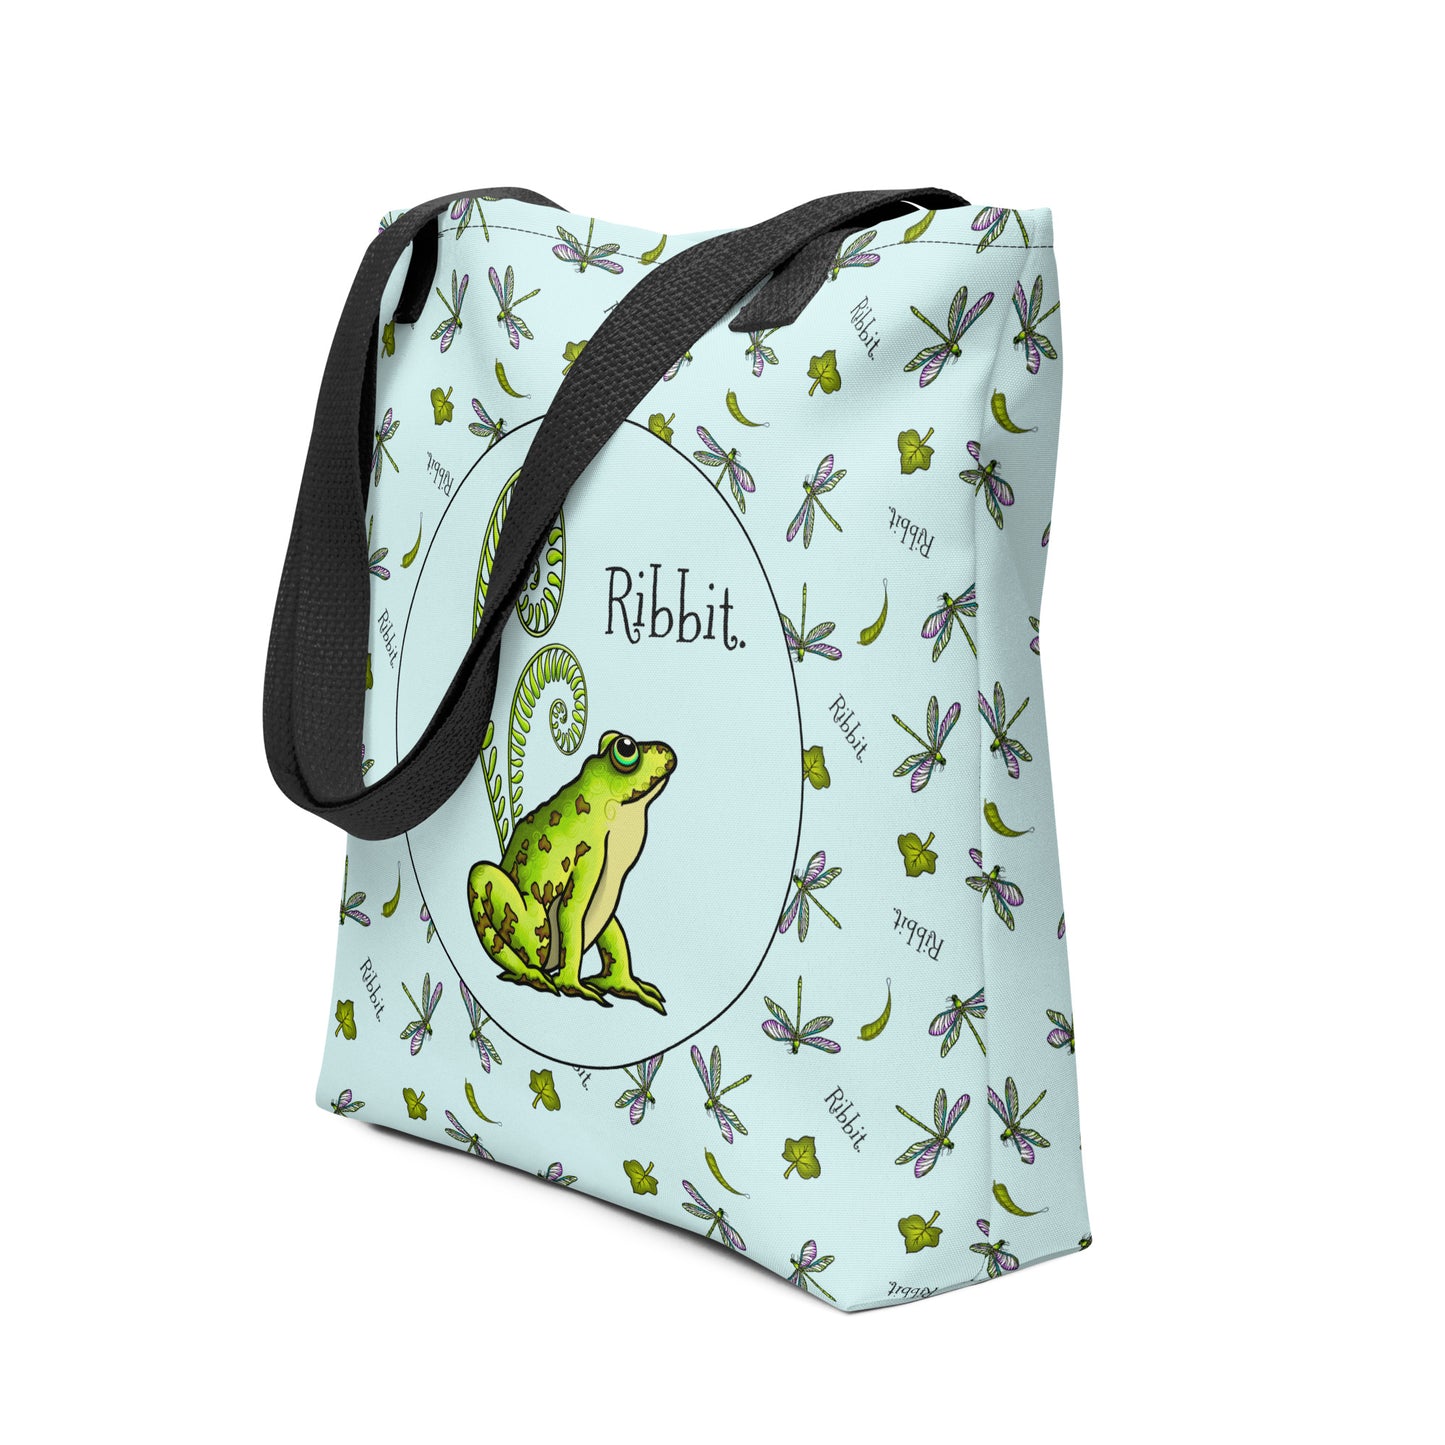 Stormseye design pretty frog large tote bag side view